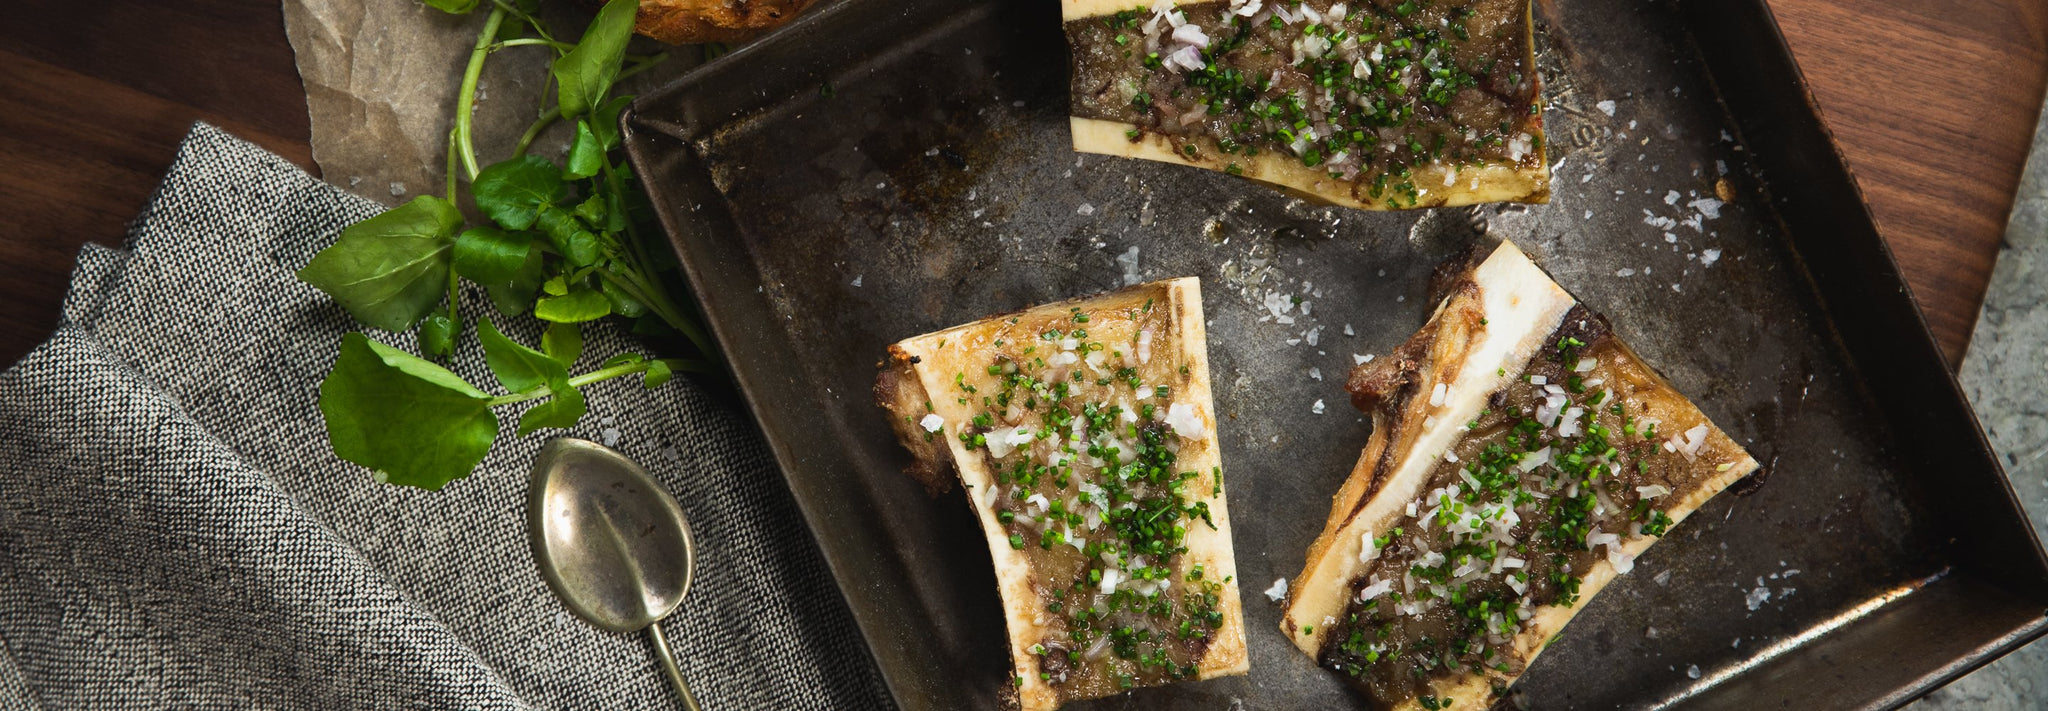 Roasted Bone Marrow with Chives & Shallots